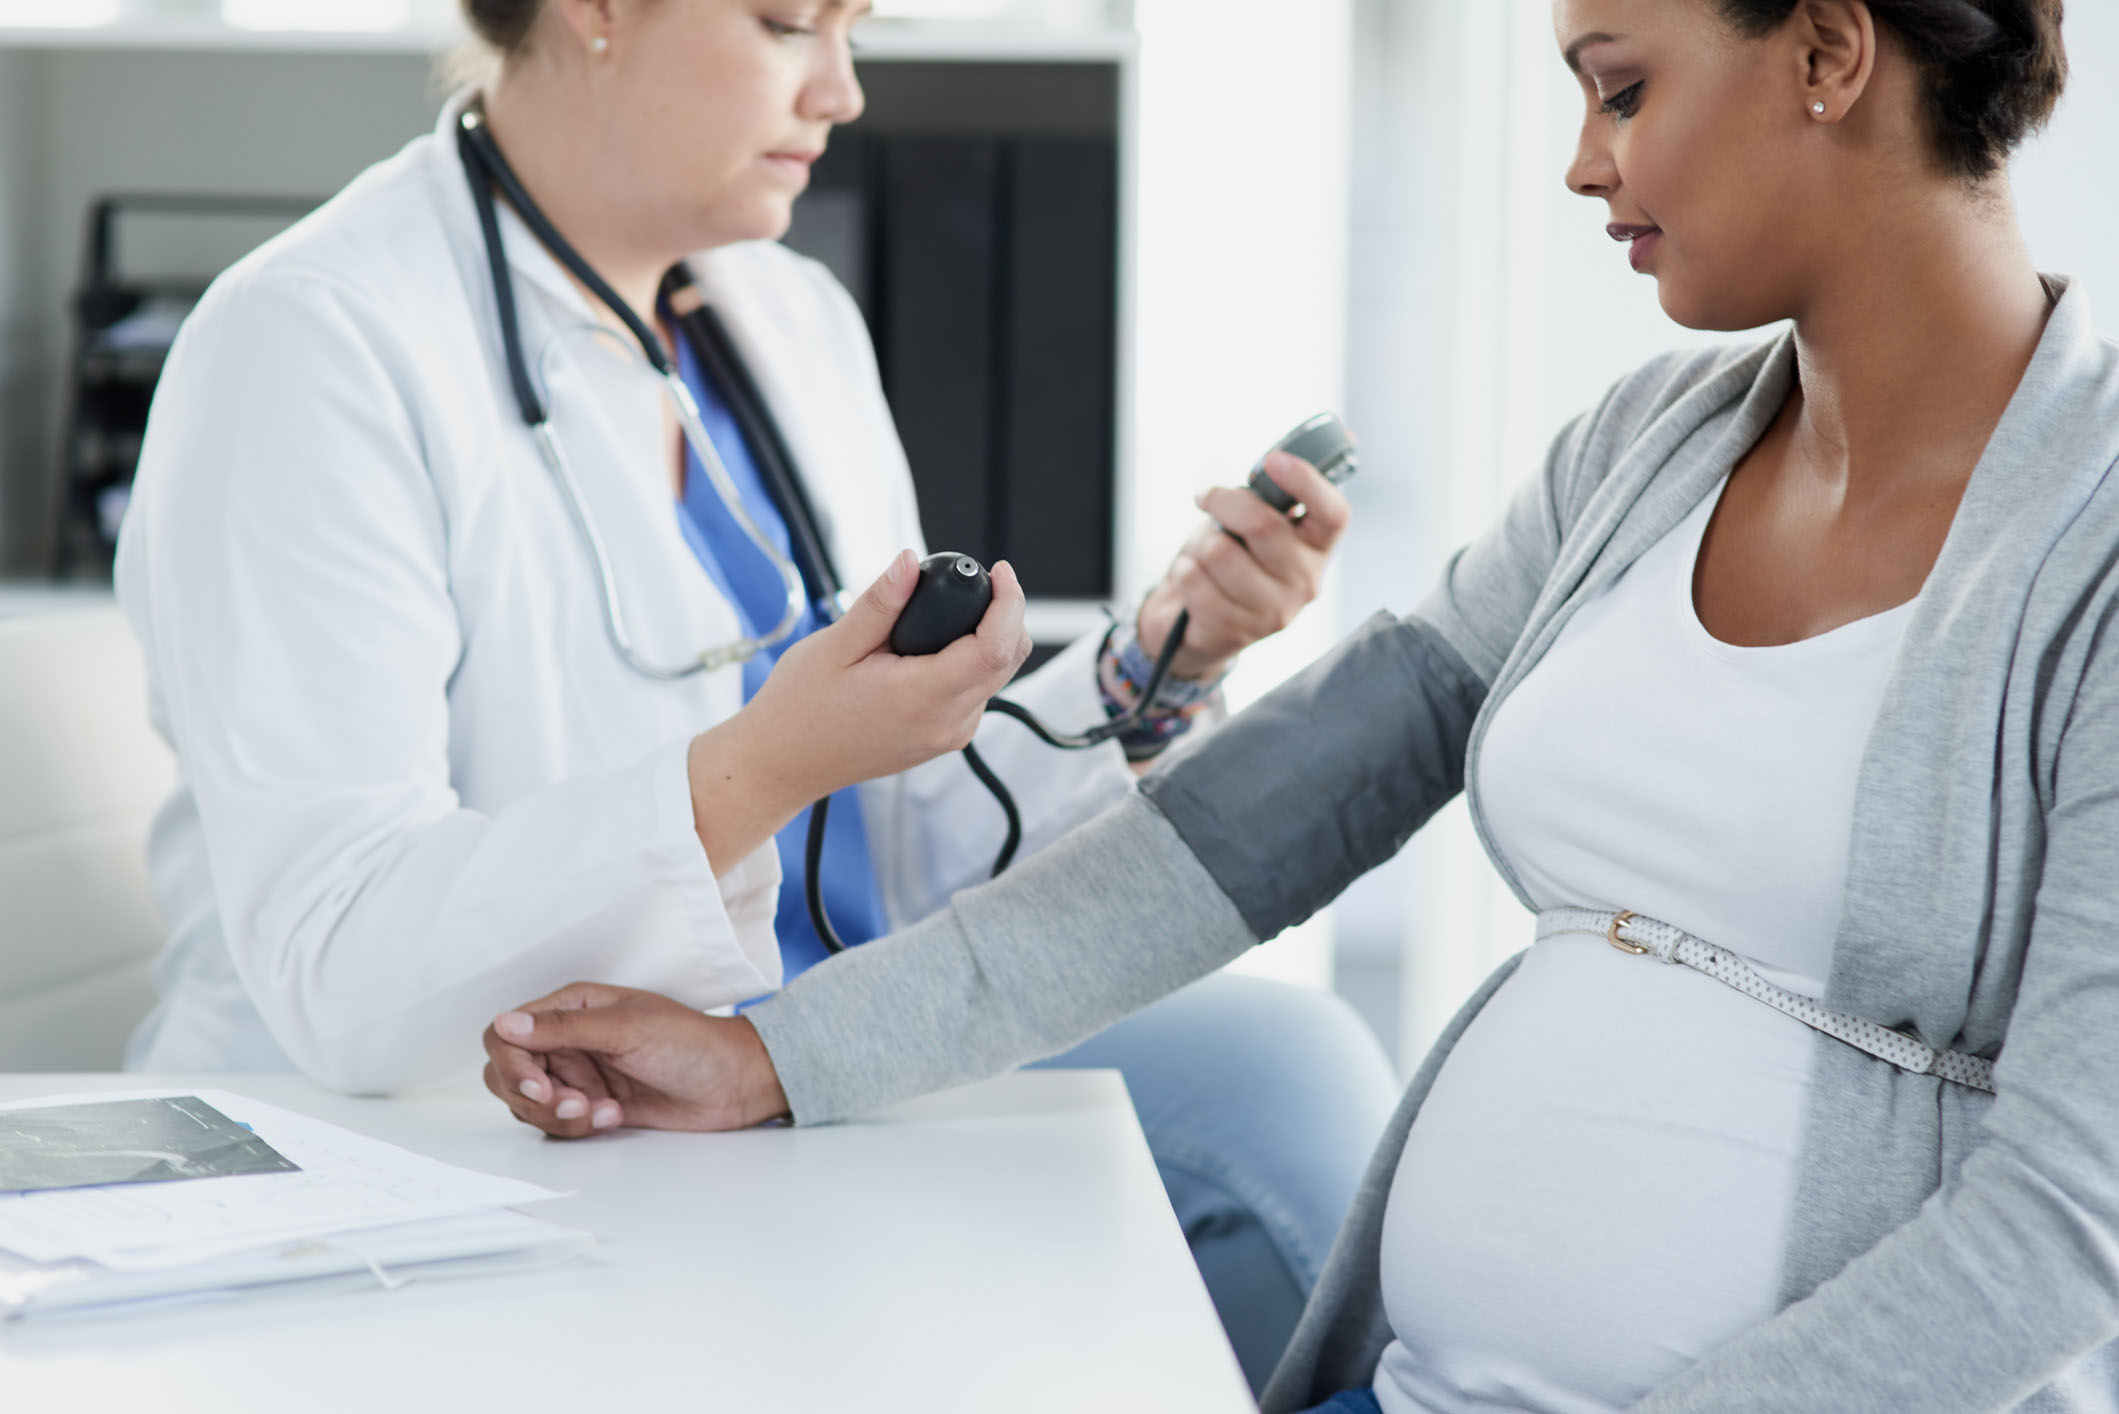 Pregnant woman getting blood pressure checked.